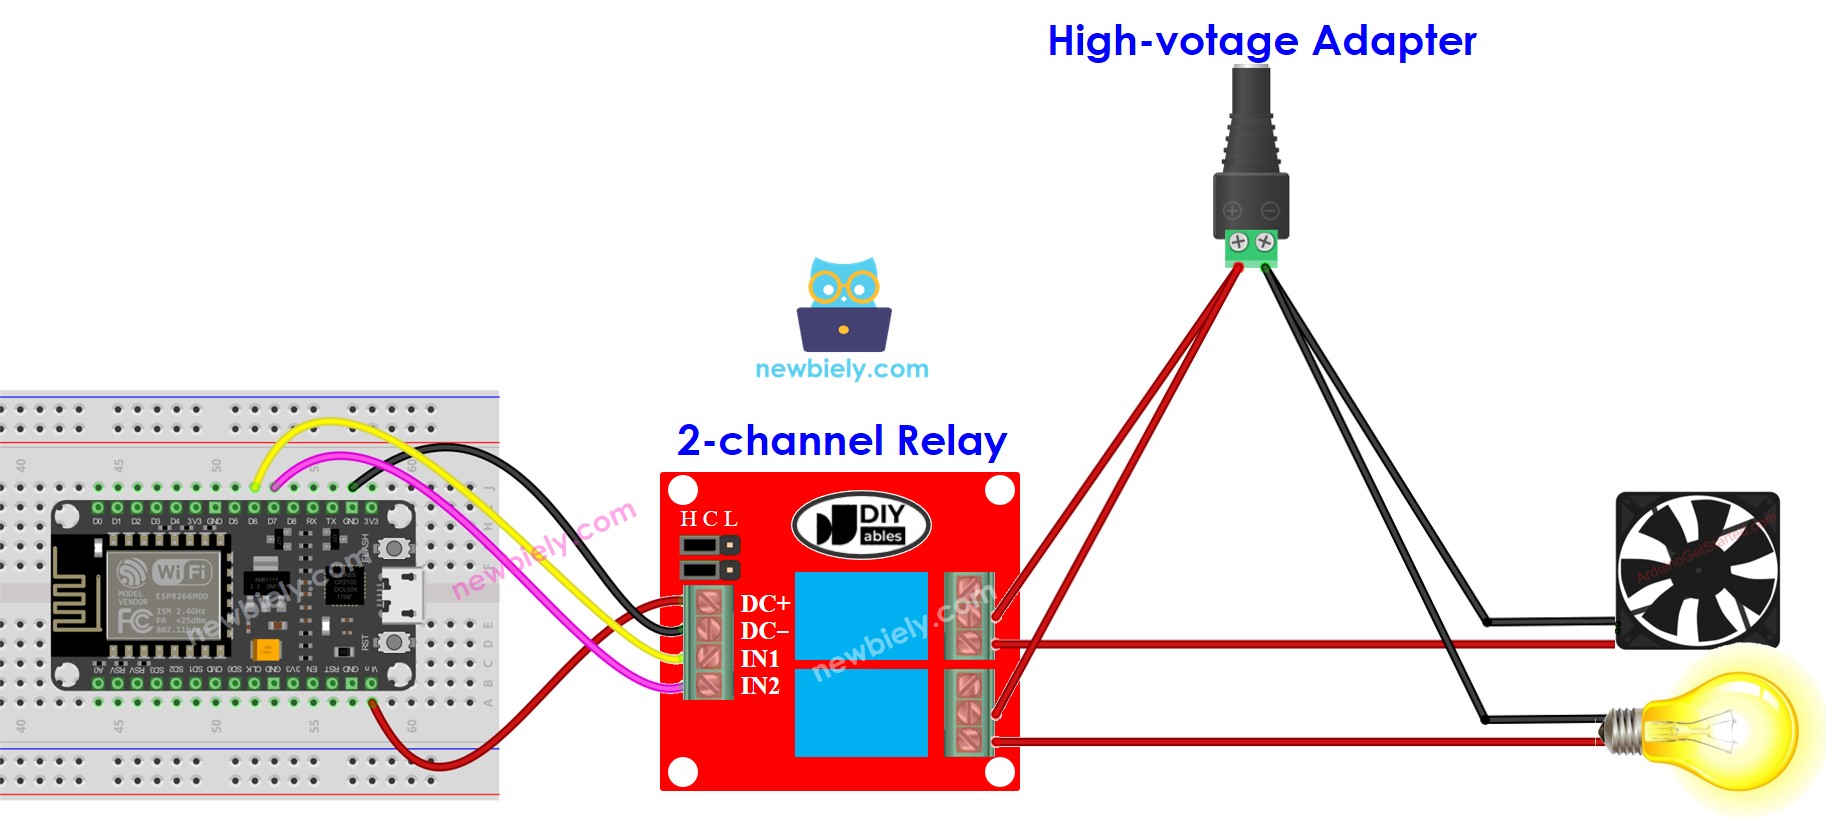 The wiring diagram between ESP8266 NodeMCU and 2-channel relay module